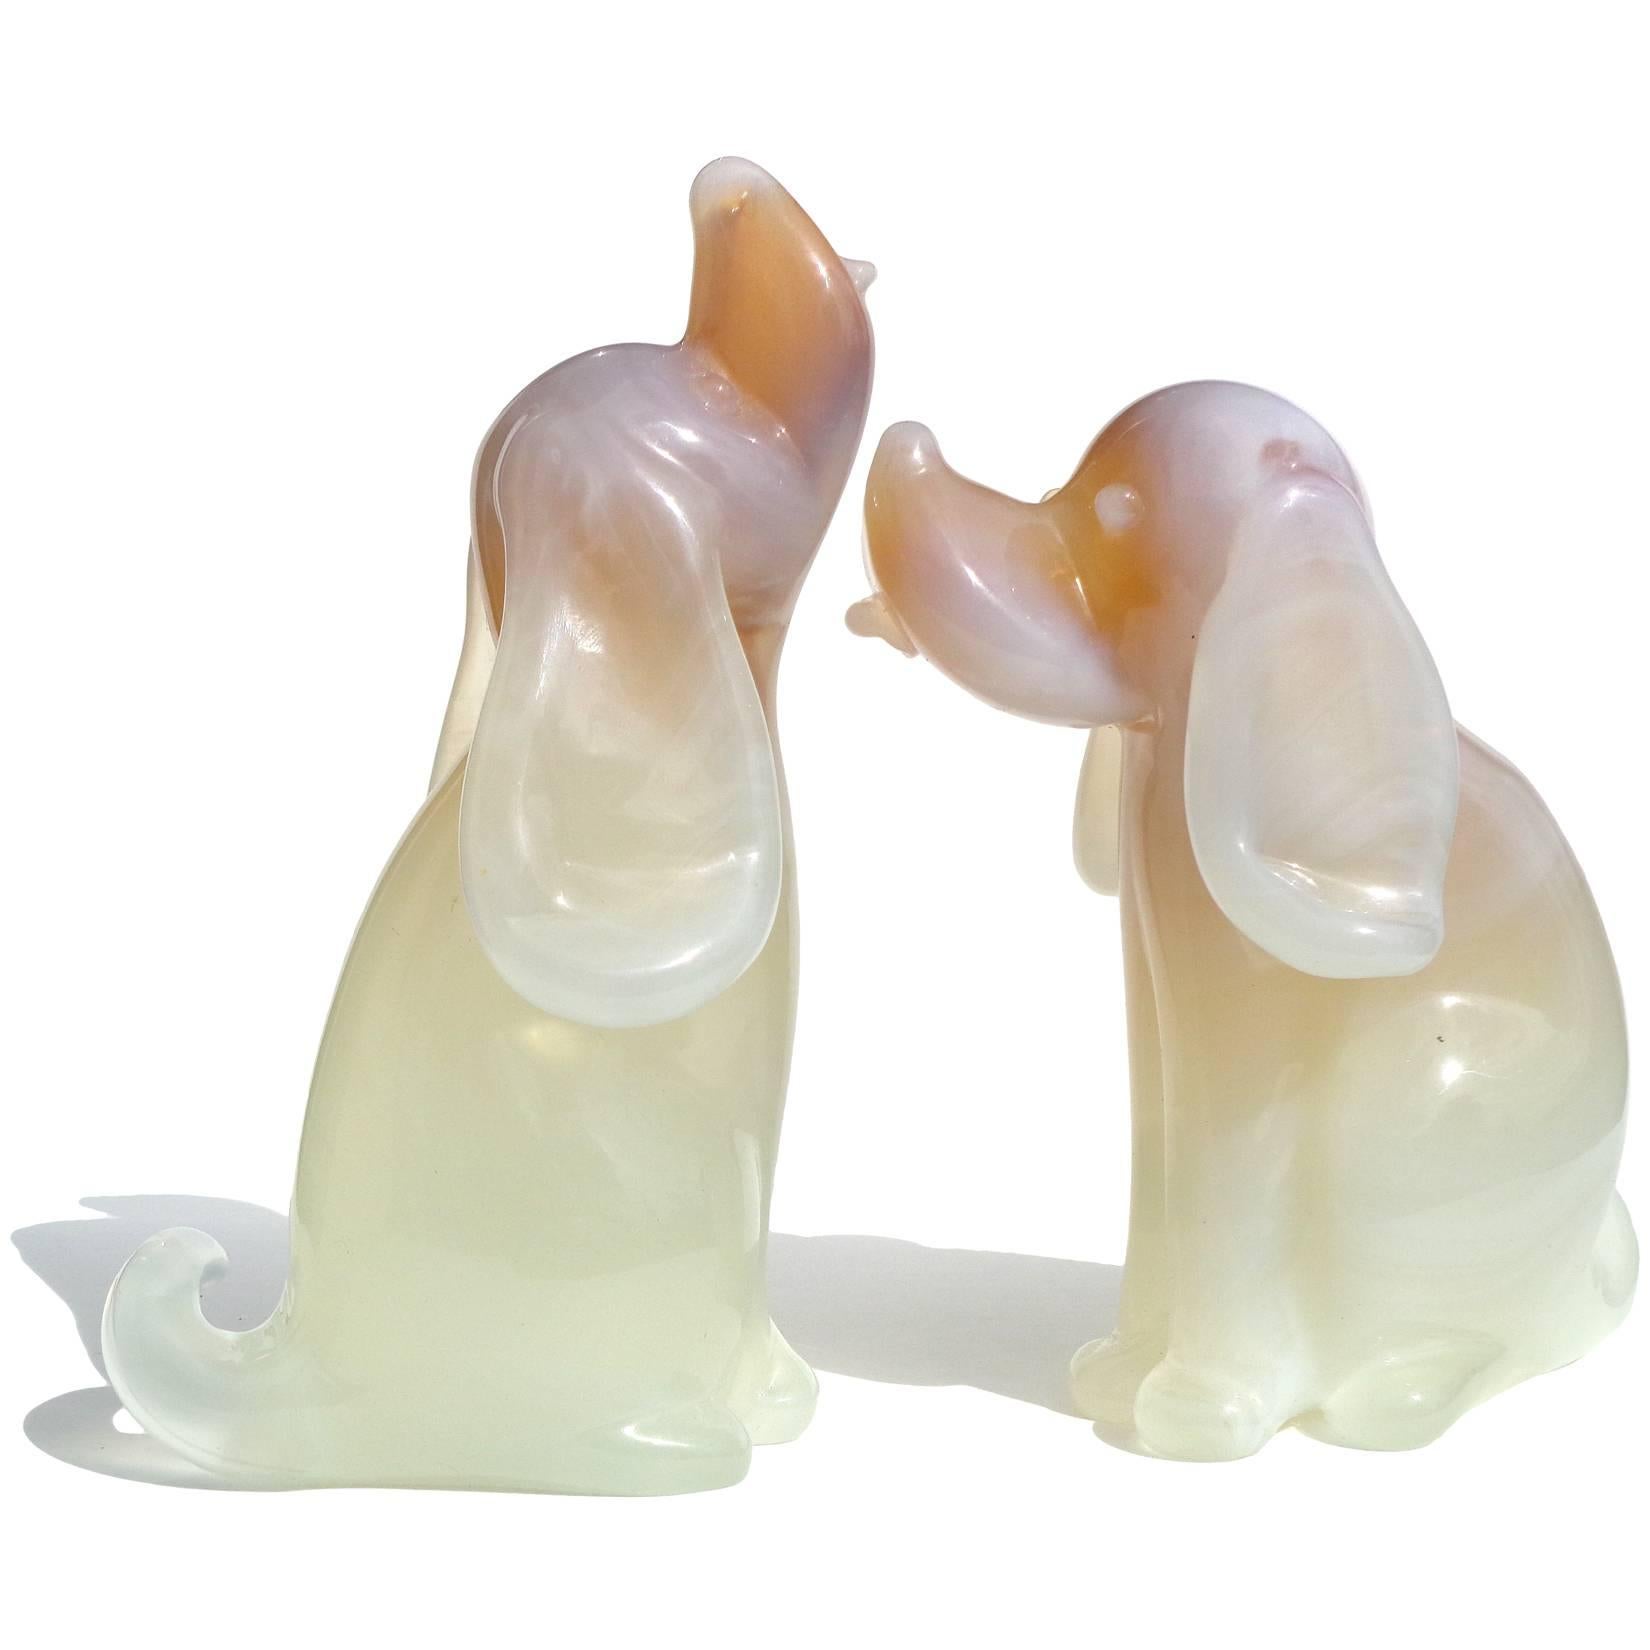 Rare set of large Murano handblown opalescent and caramel swirl / marbled art glass puppy dogs. Documented to designer Archimede Seguso. Believe they are Basset hounds or Beagle dogs. Very unusual technique. A must for the dog lover in your family.